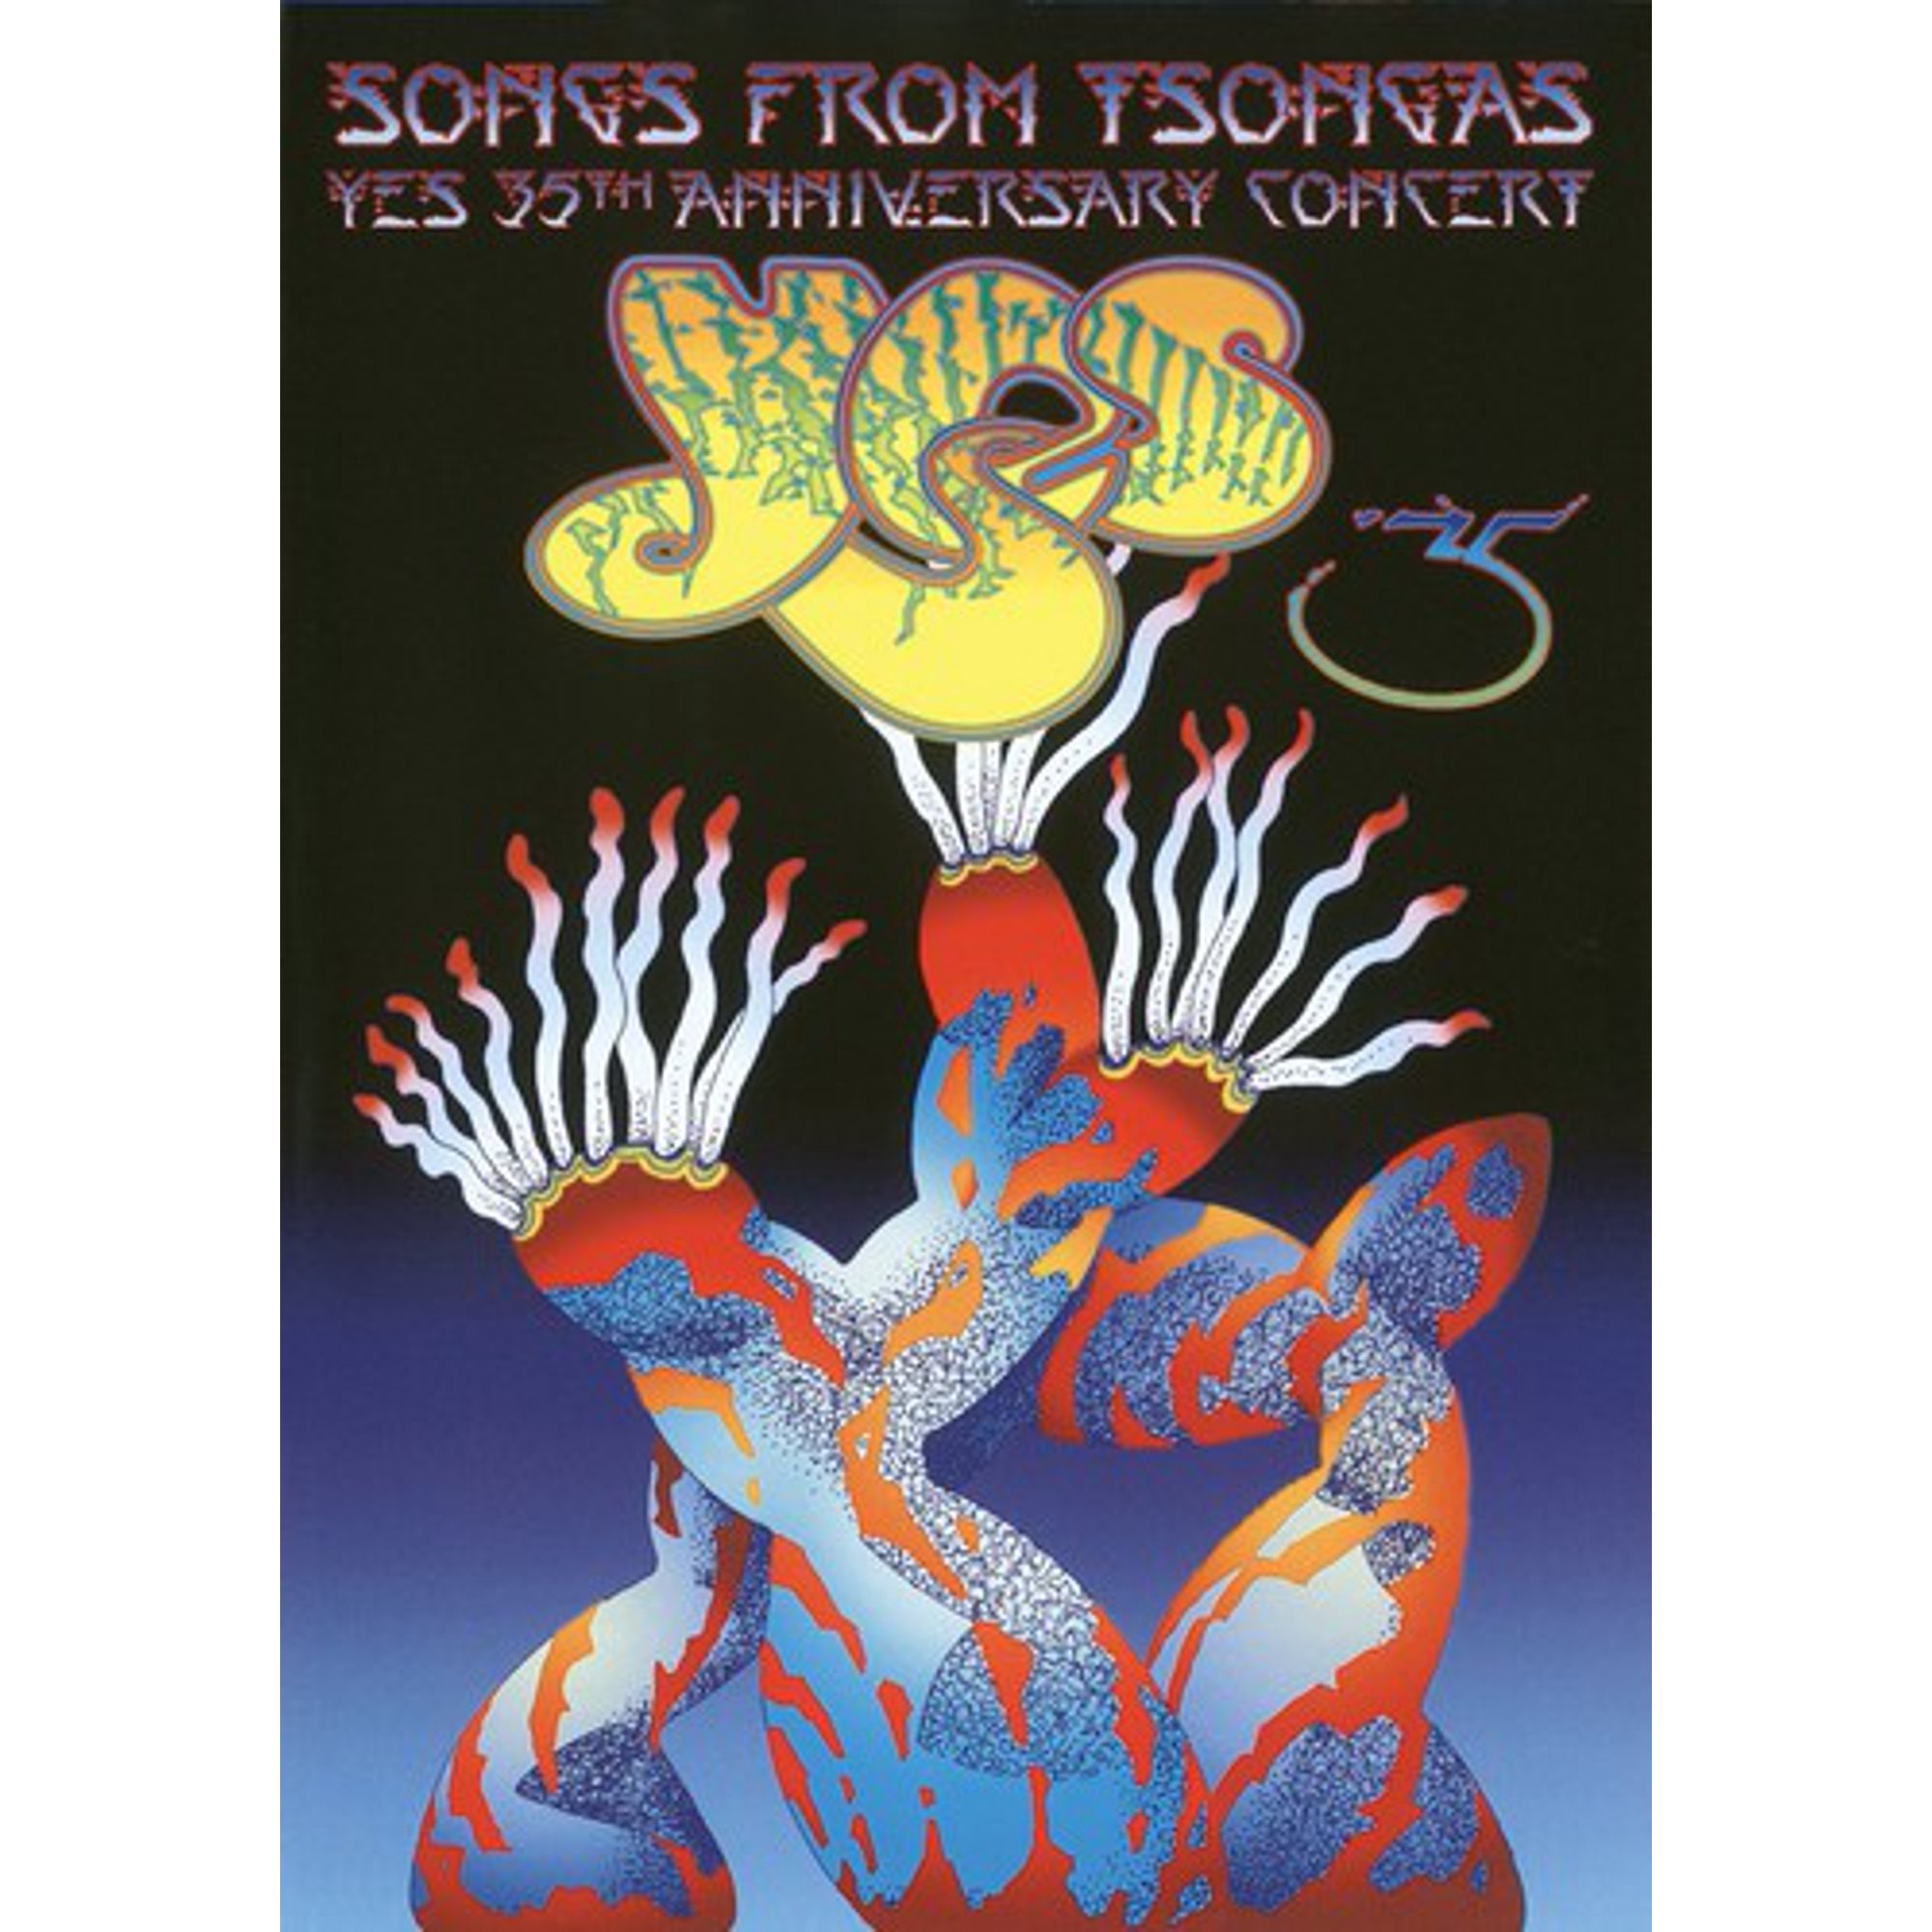 Pre-owned - Songs From Tsongas 35th Anniversary Concert (DVD